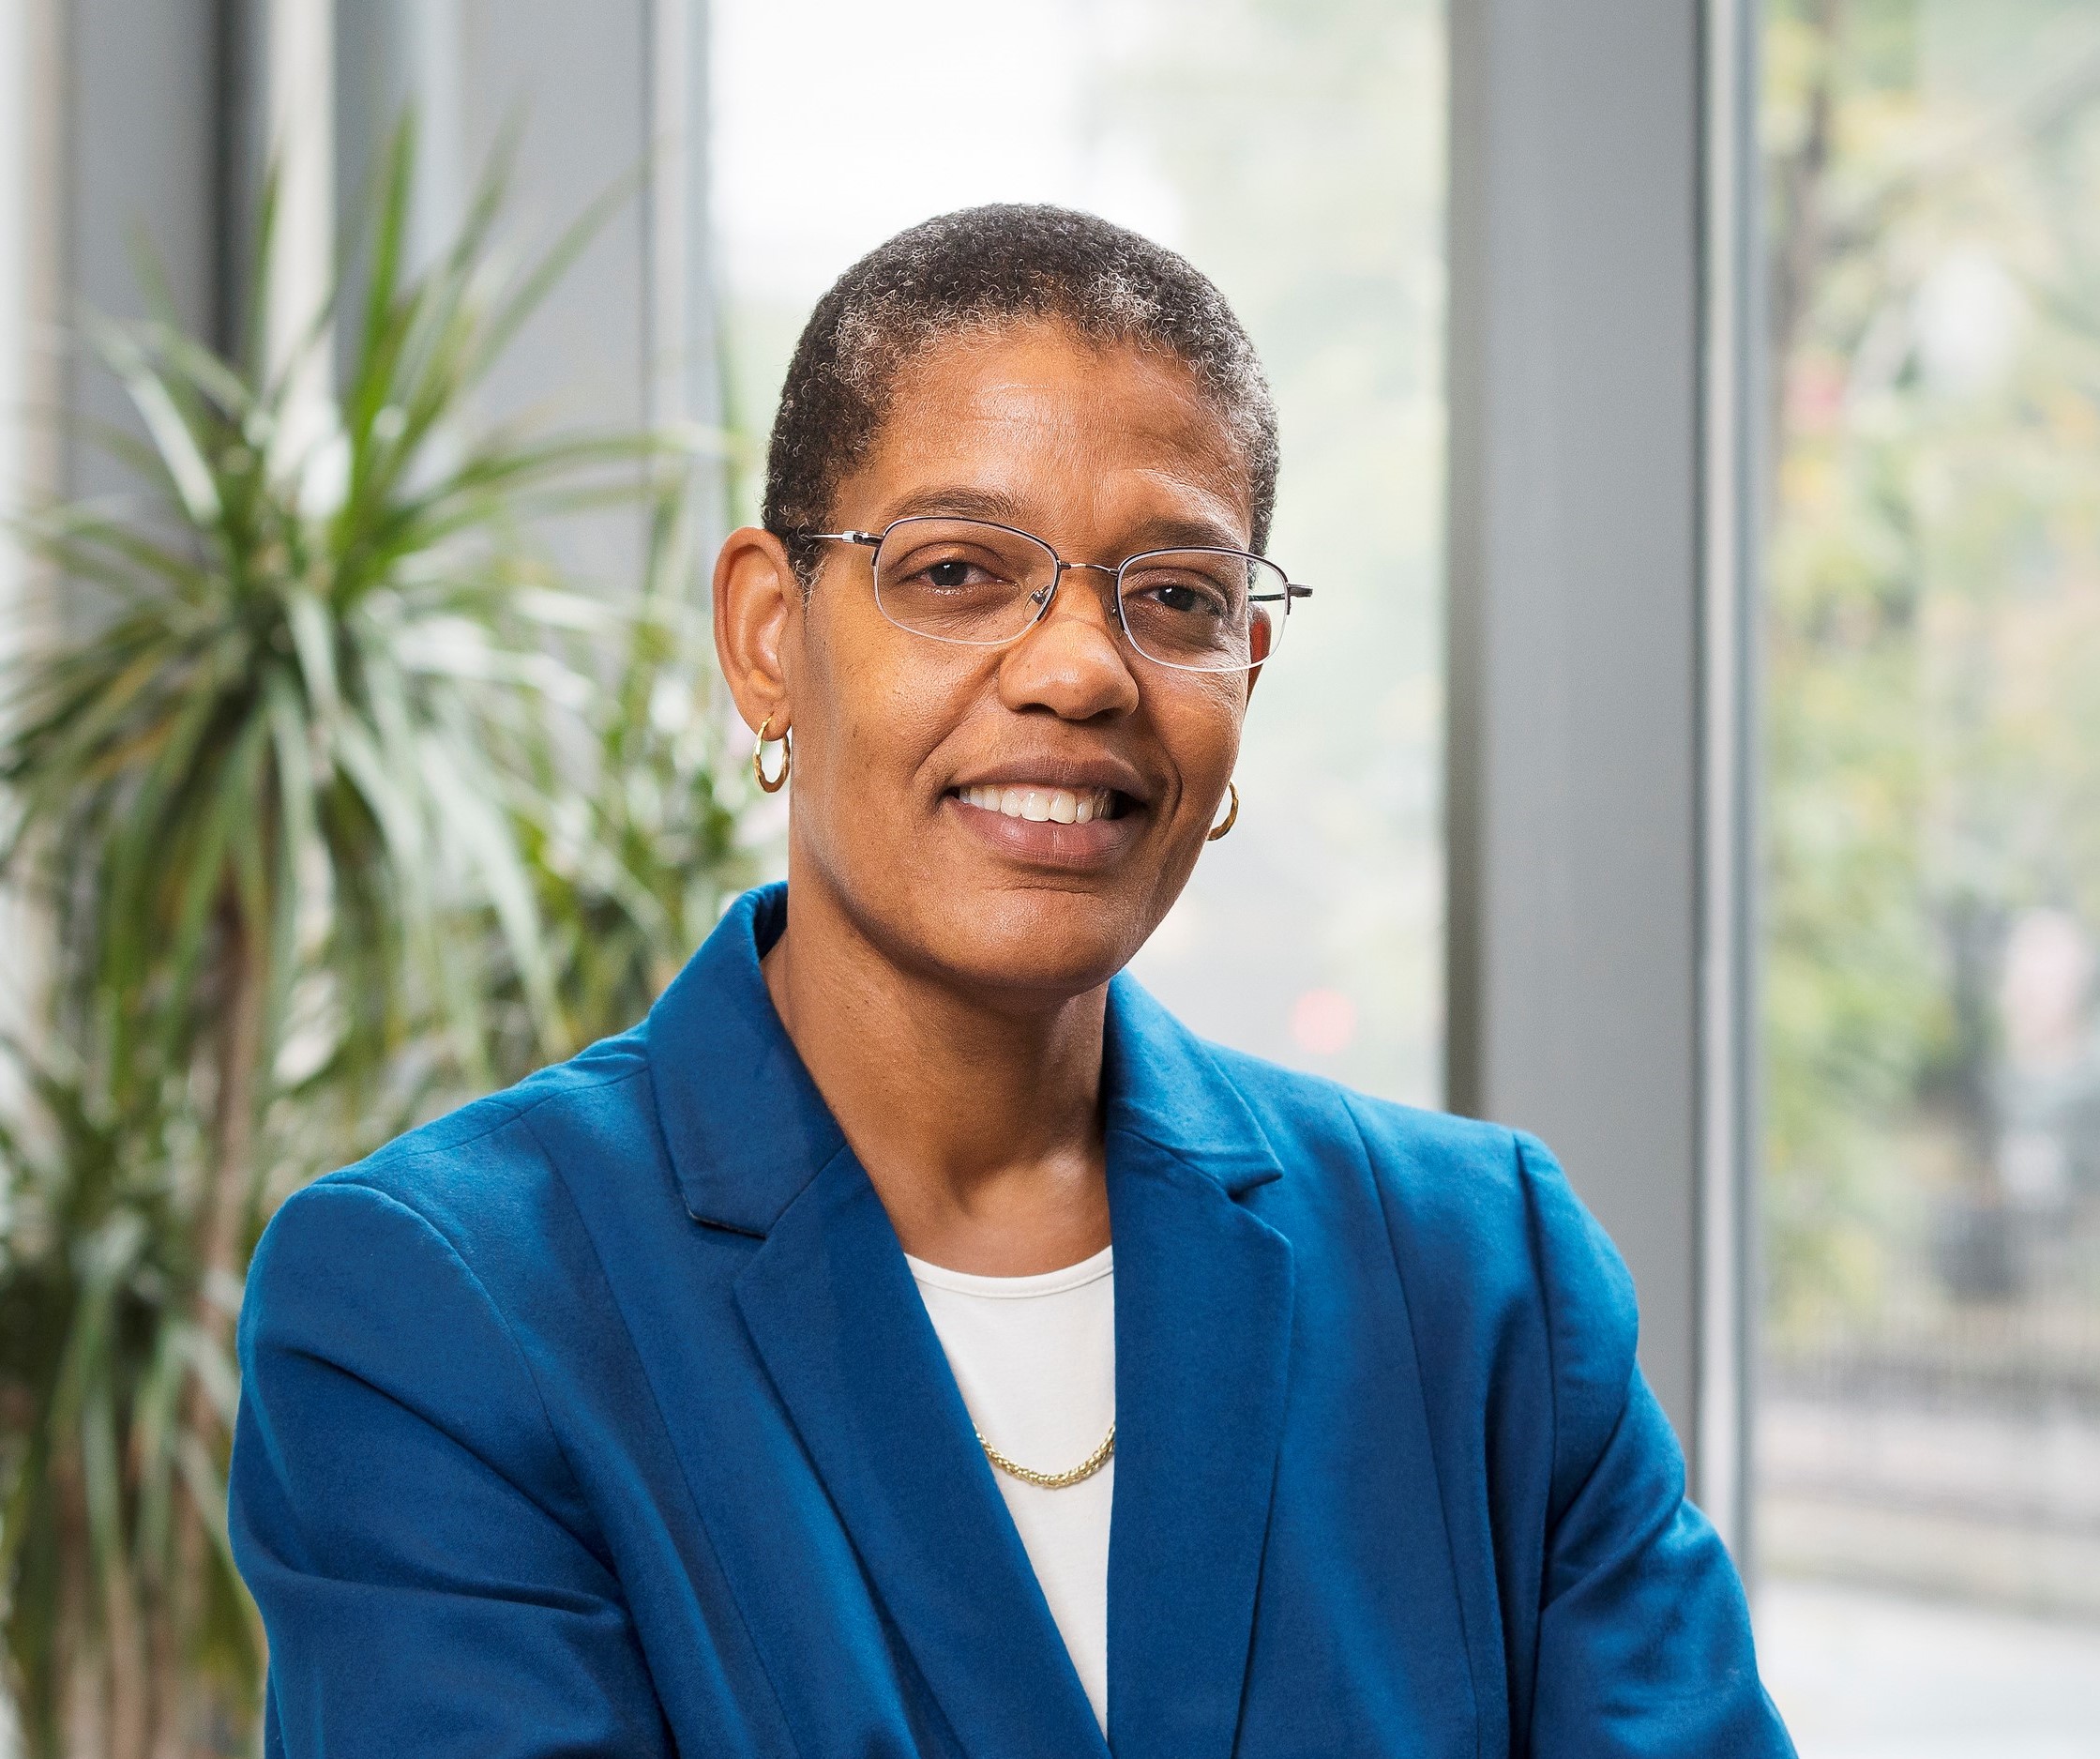 Michelle A. Williams, SM, ScD, is dean of the faculty at the Harvard T.H. Chan School of Public Health